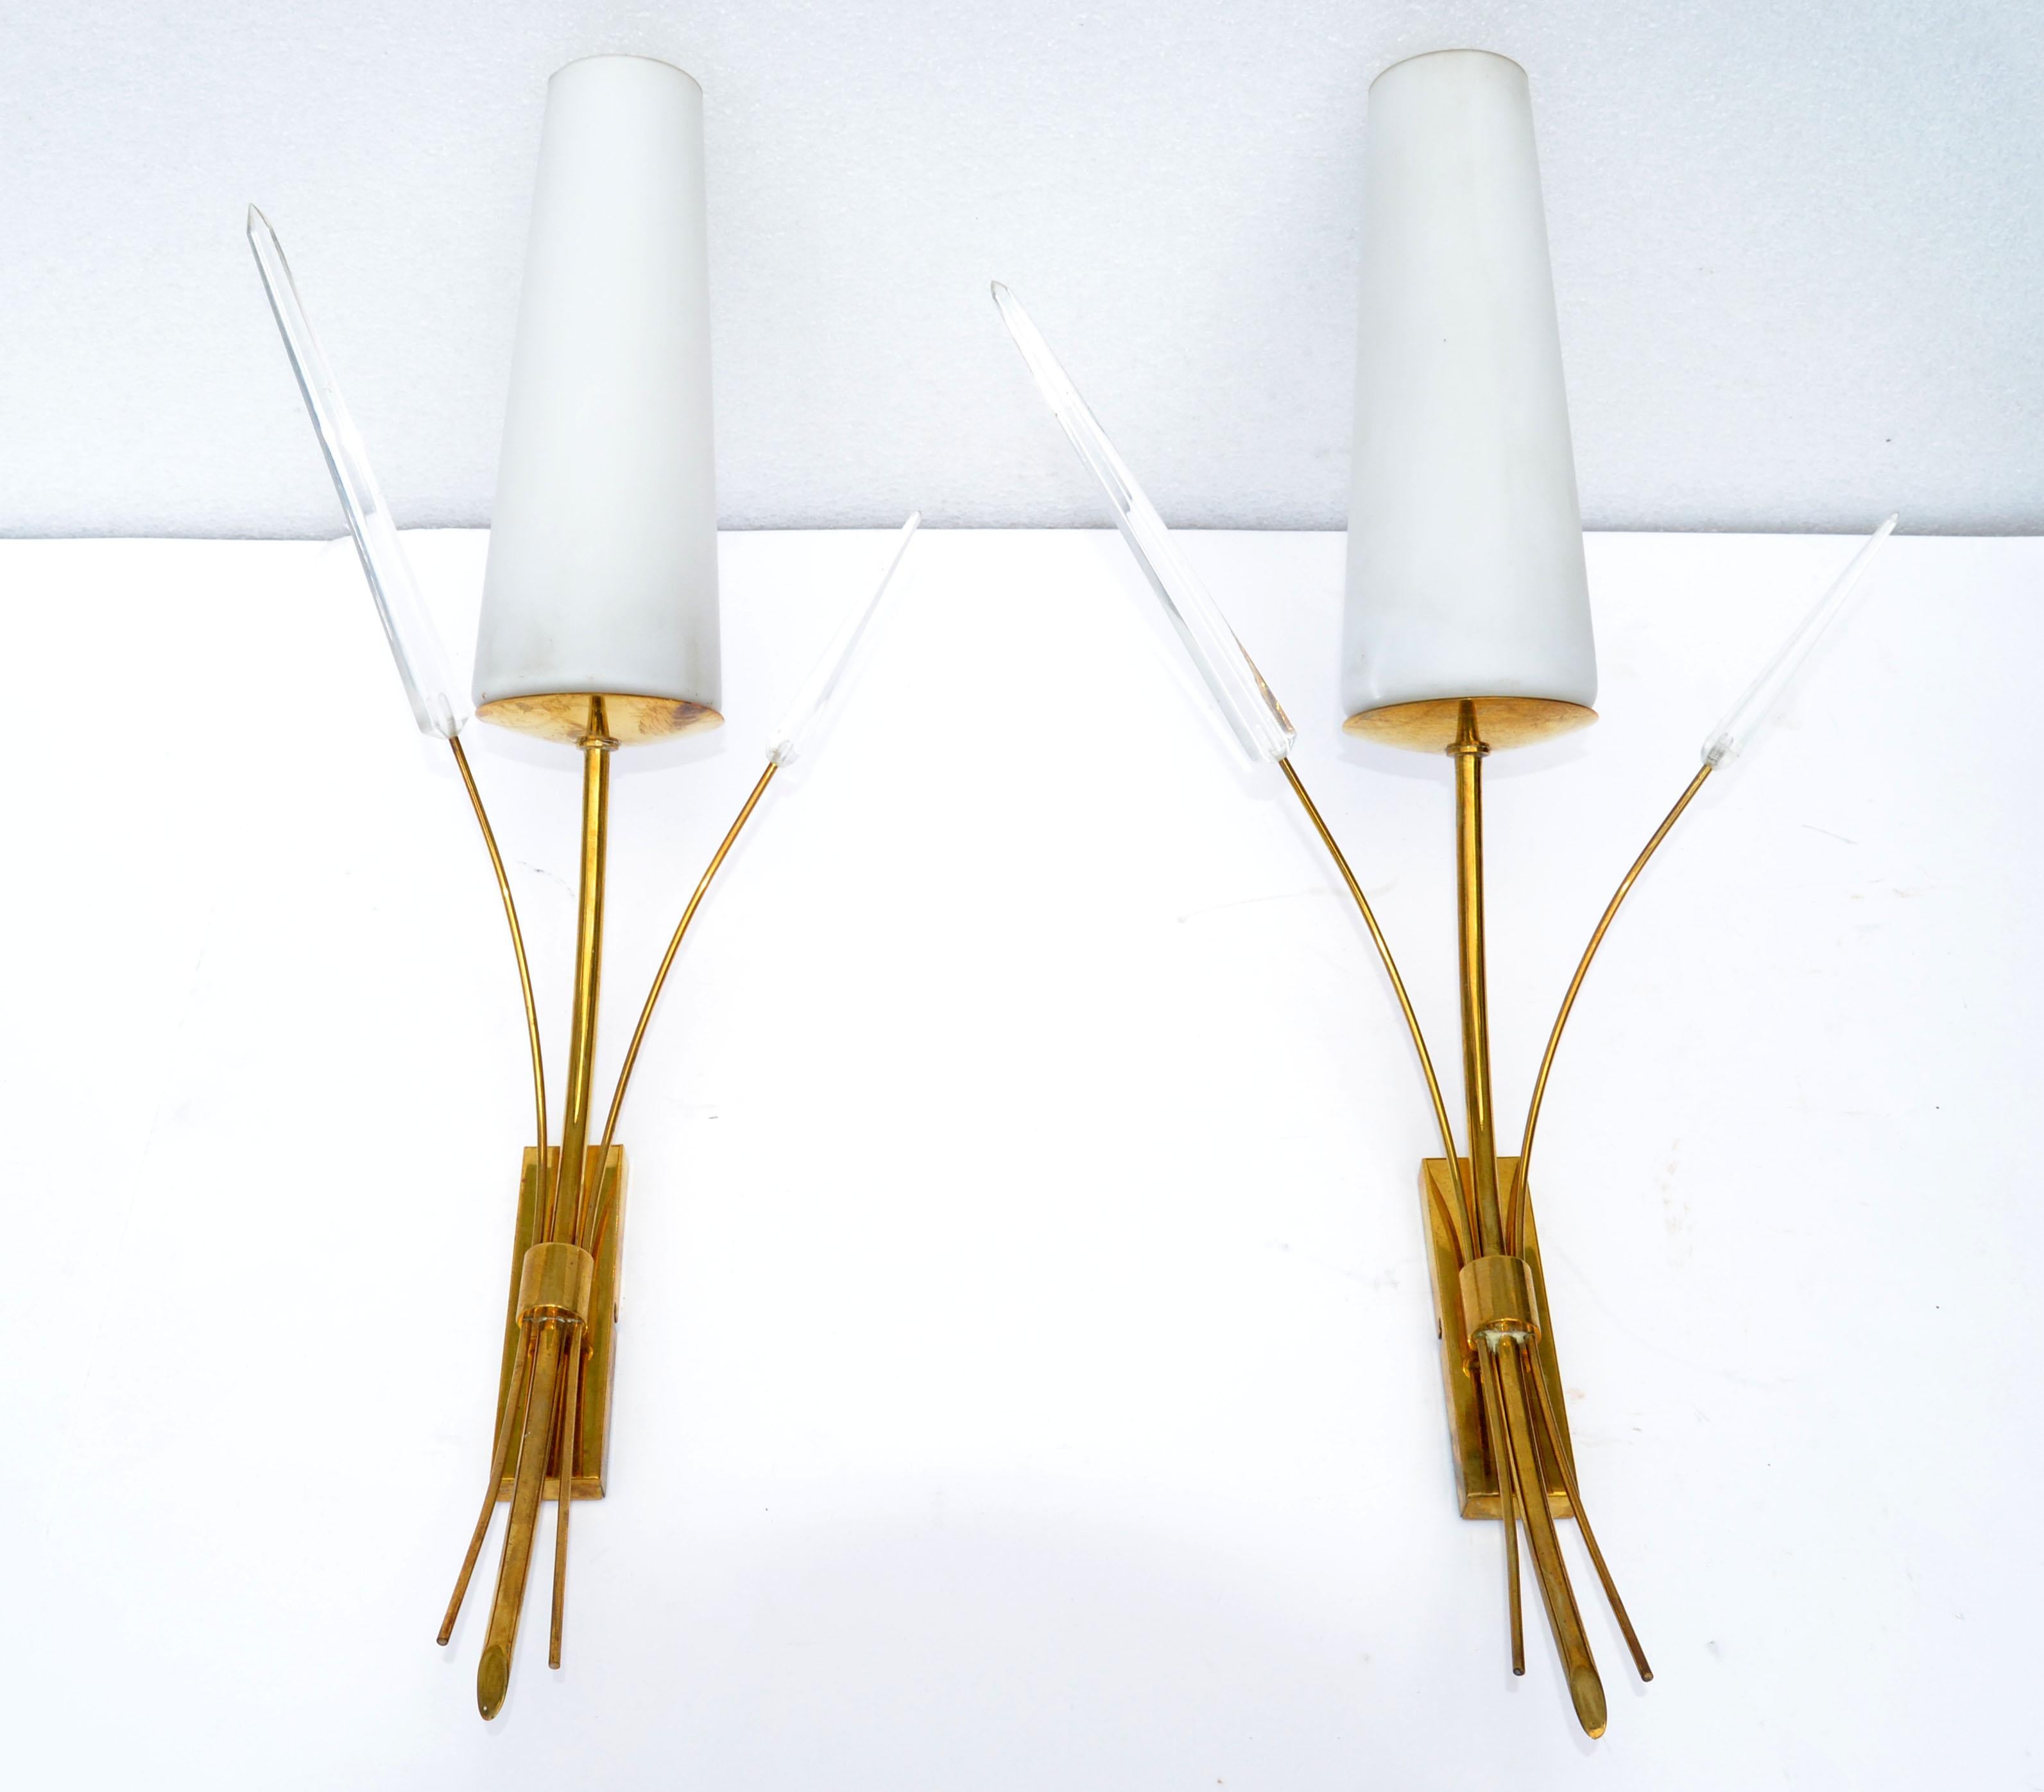 Faceted Maison Lunel Sconce Lucite Brass & Opaline Shade France Mid-Century Modern, Pair